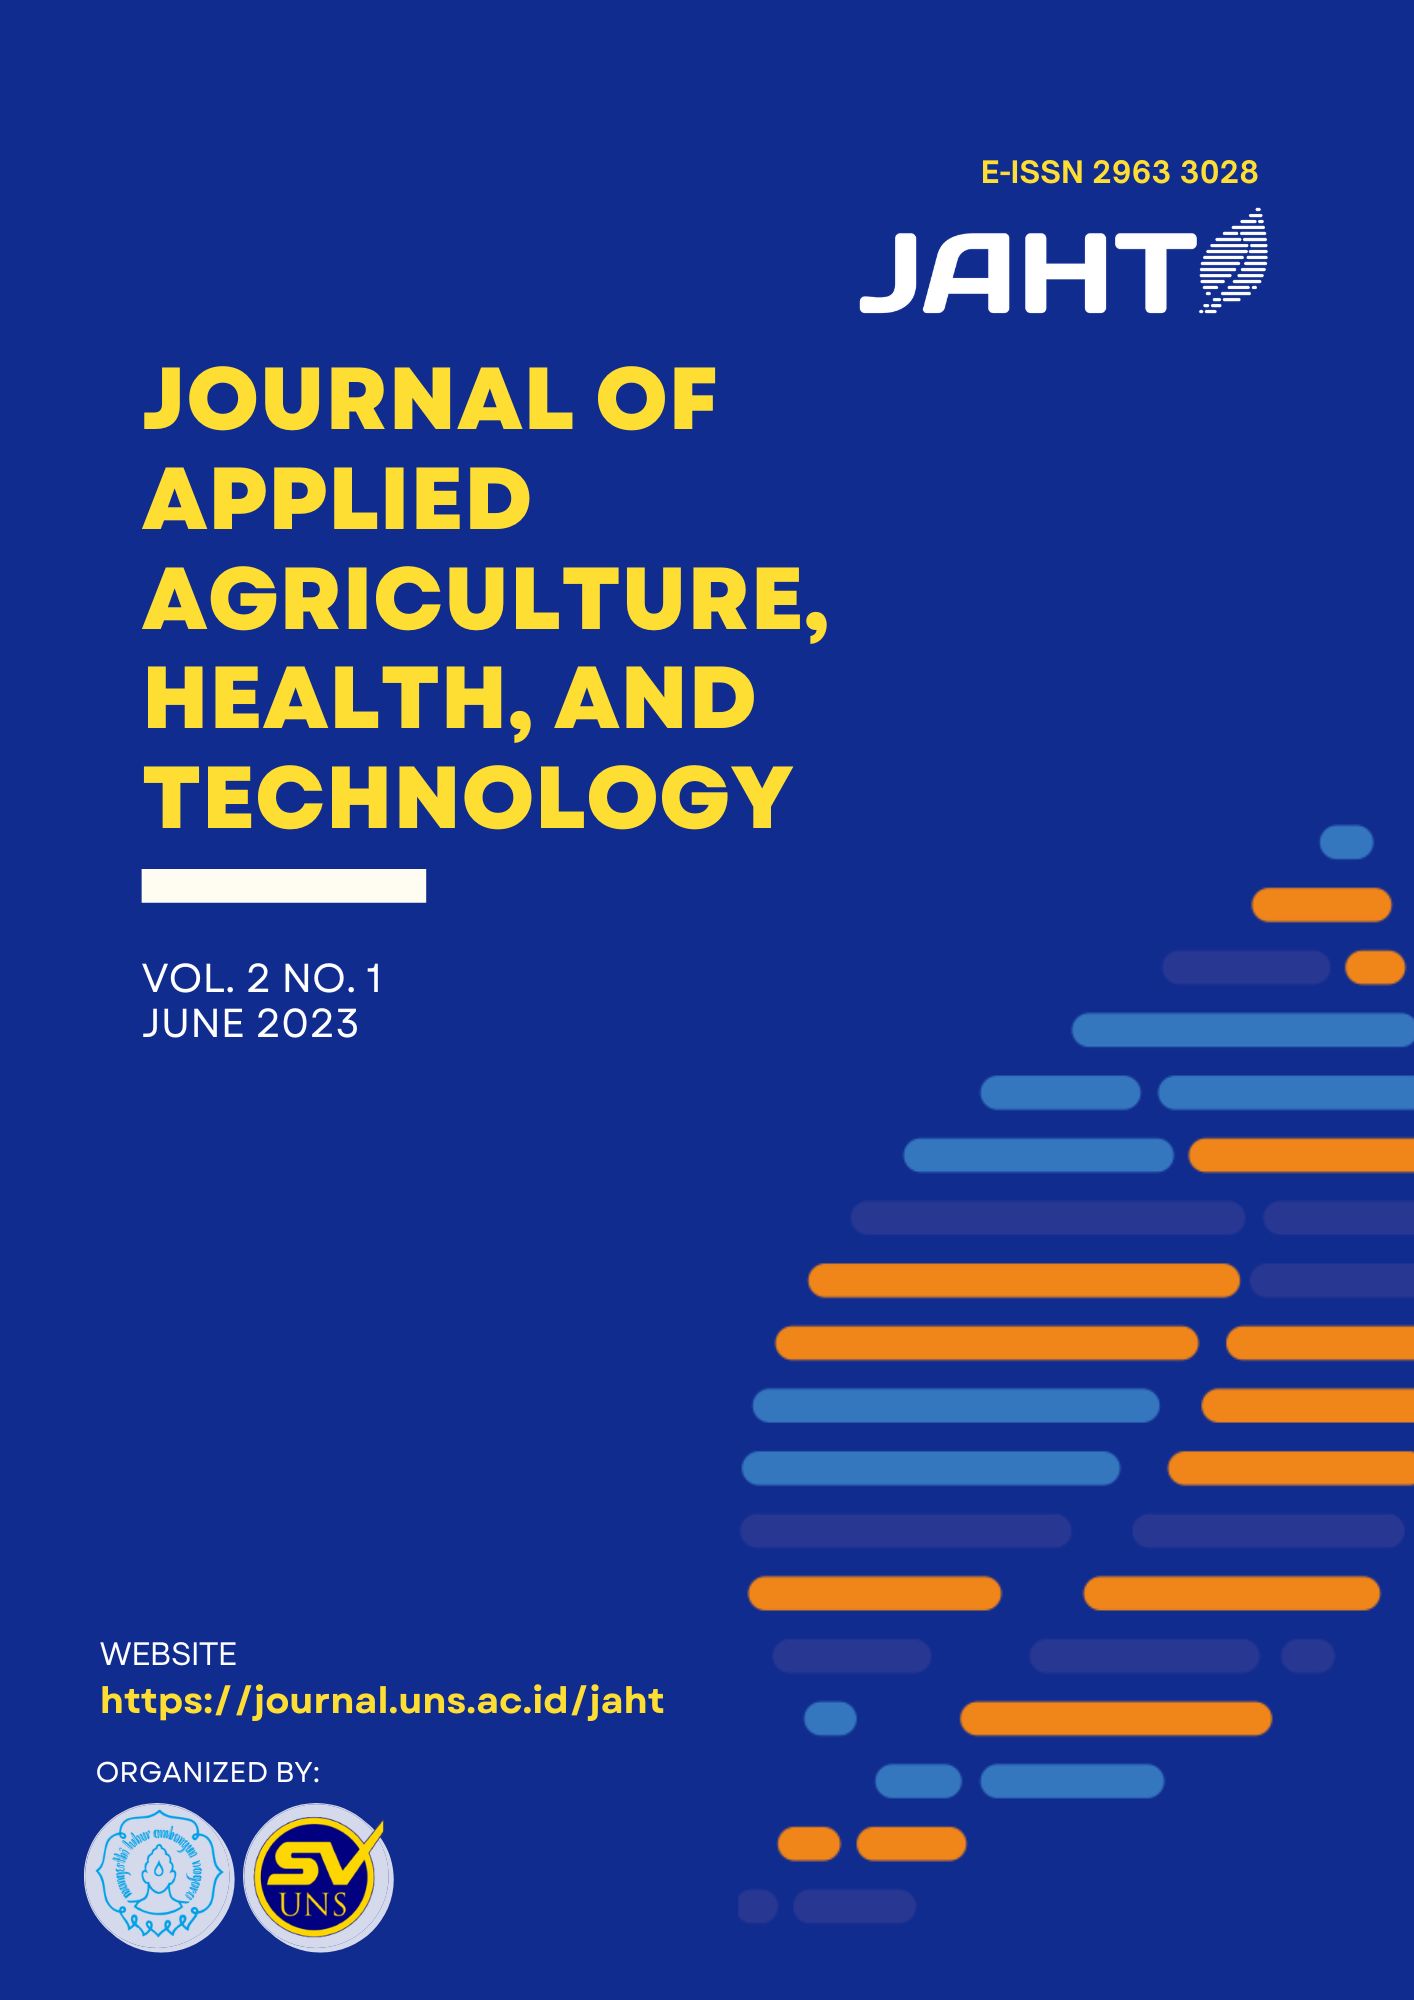 JAHT: Journal of Applied Agriculture, Health, and Technology